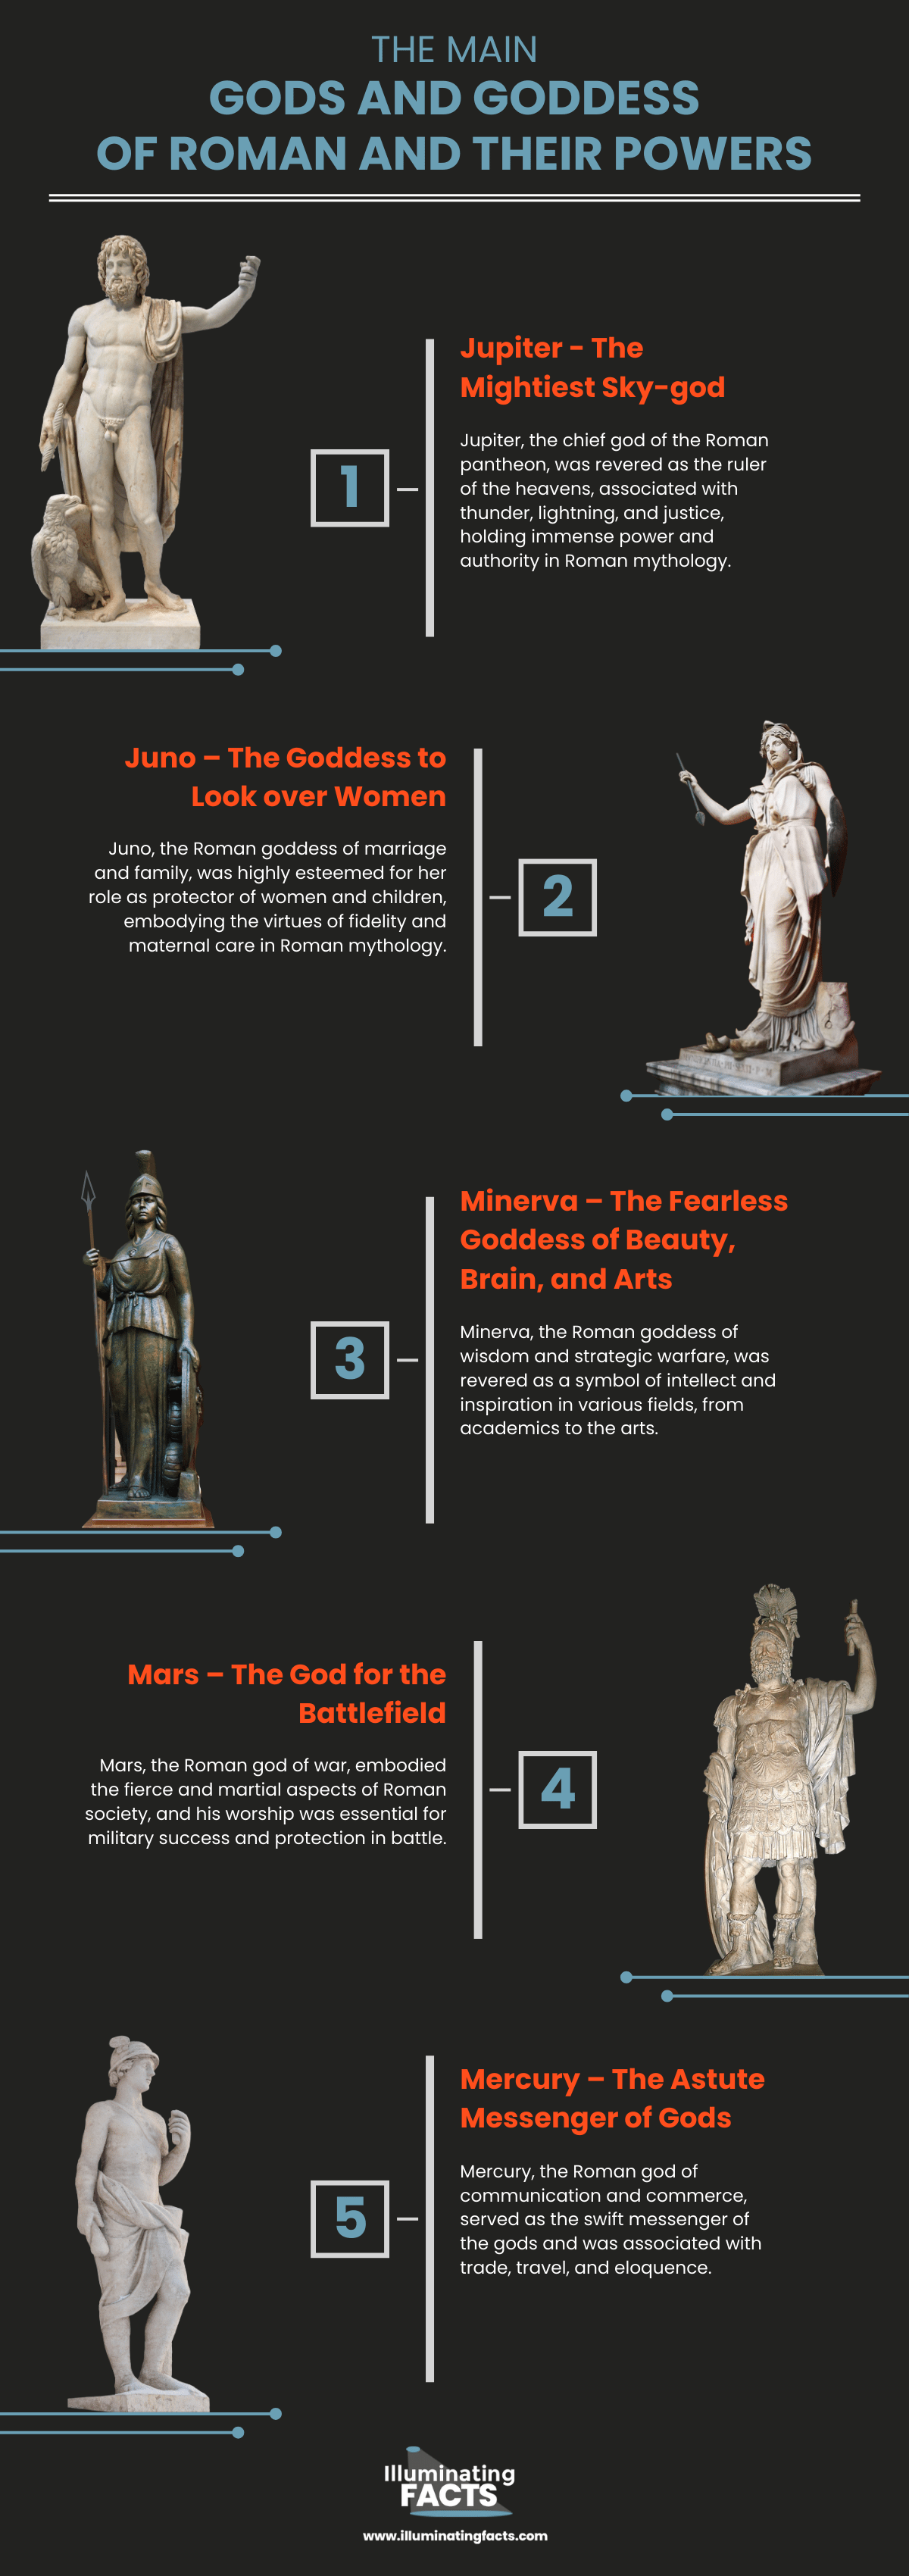 The Main Gods and Goddess and their Powers